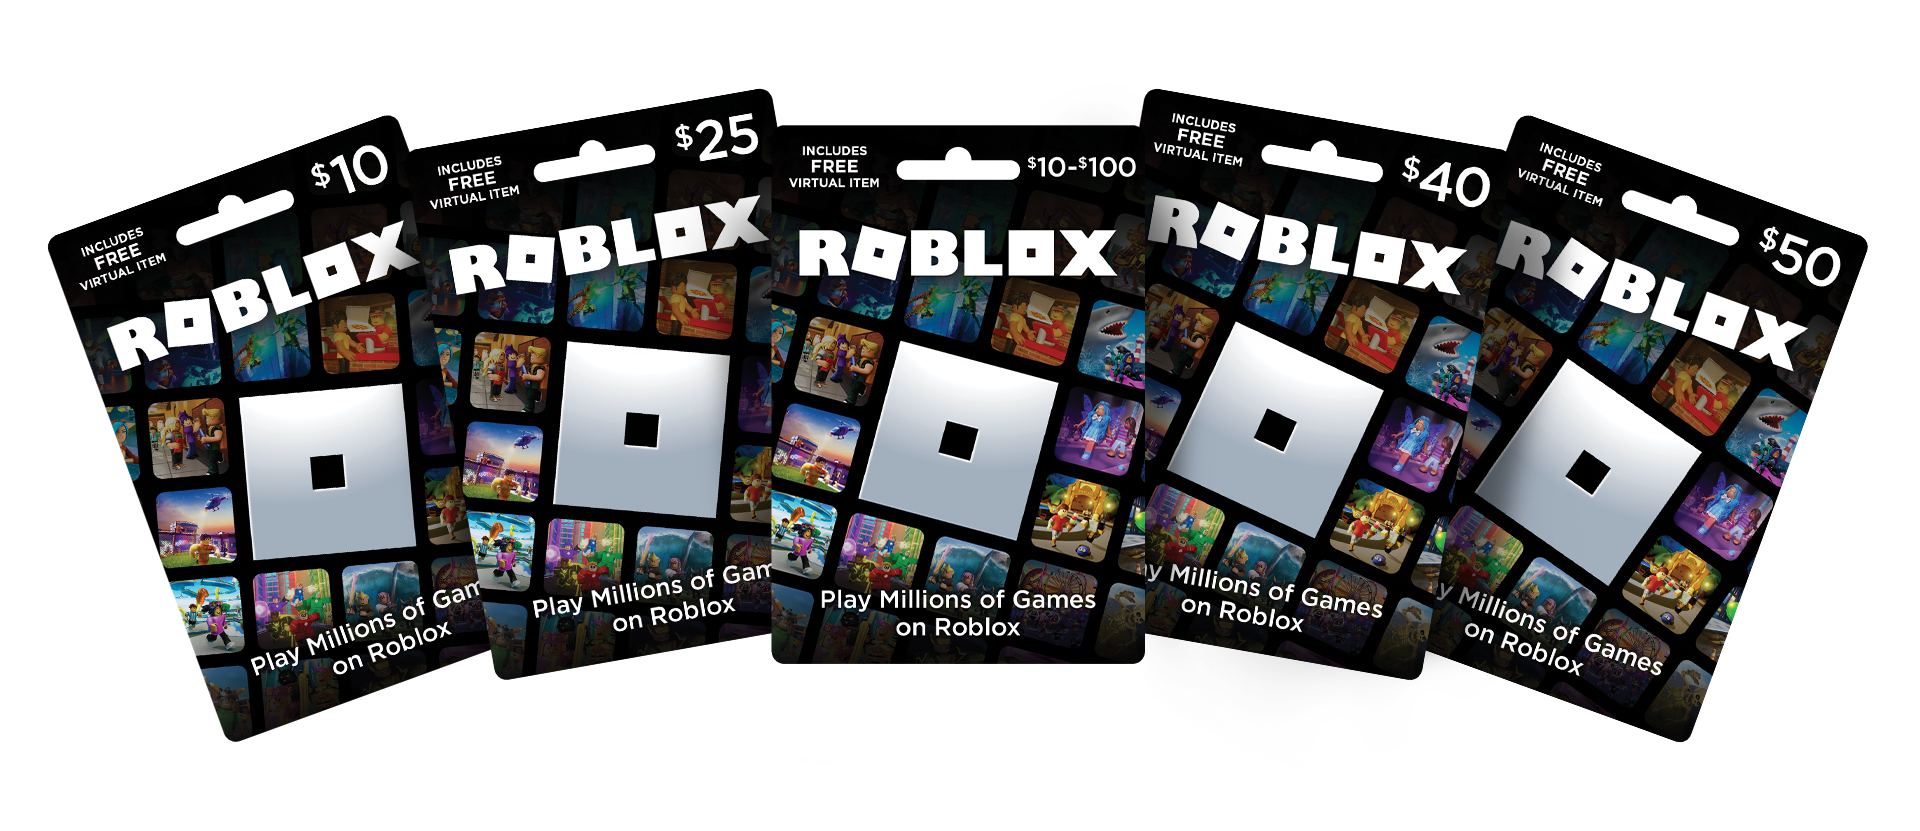 T Card Roblox Roblox 25 Digital T Card Includes Exclusive